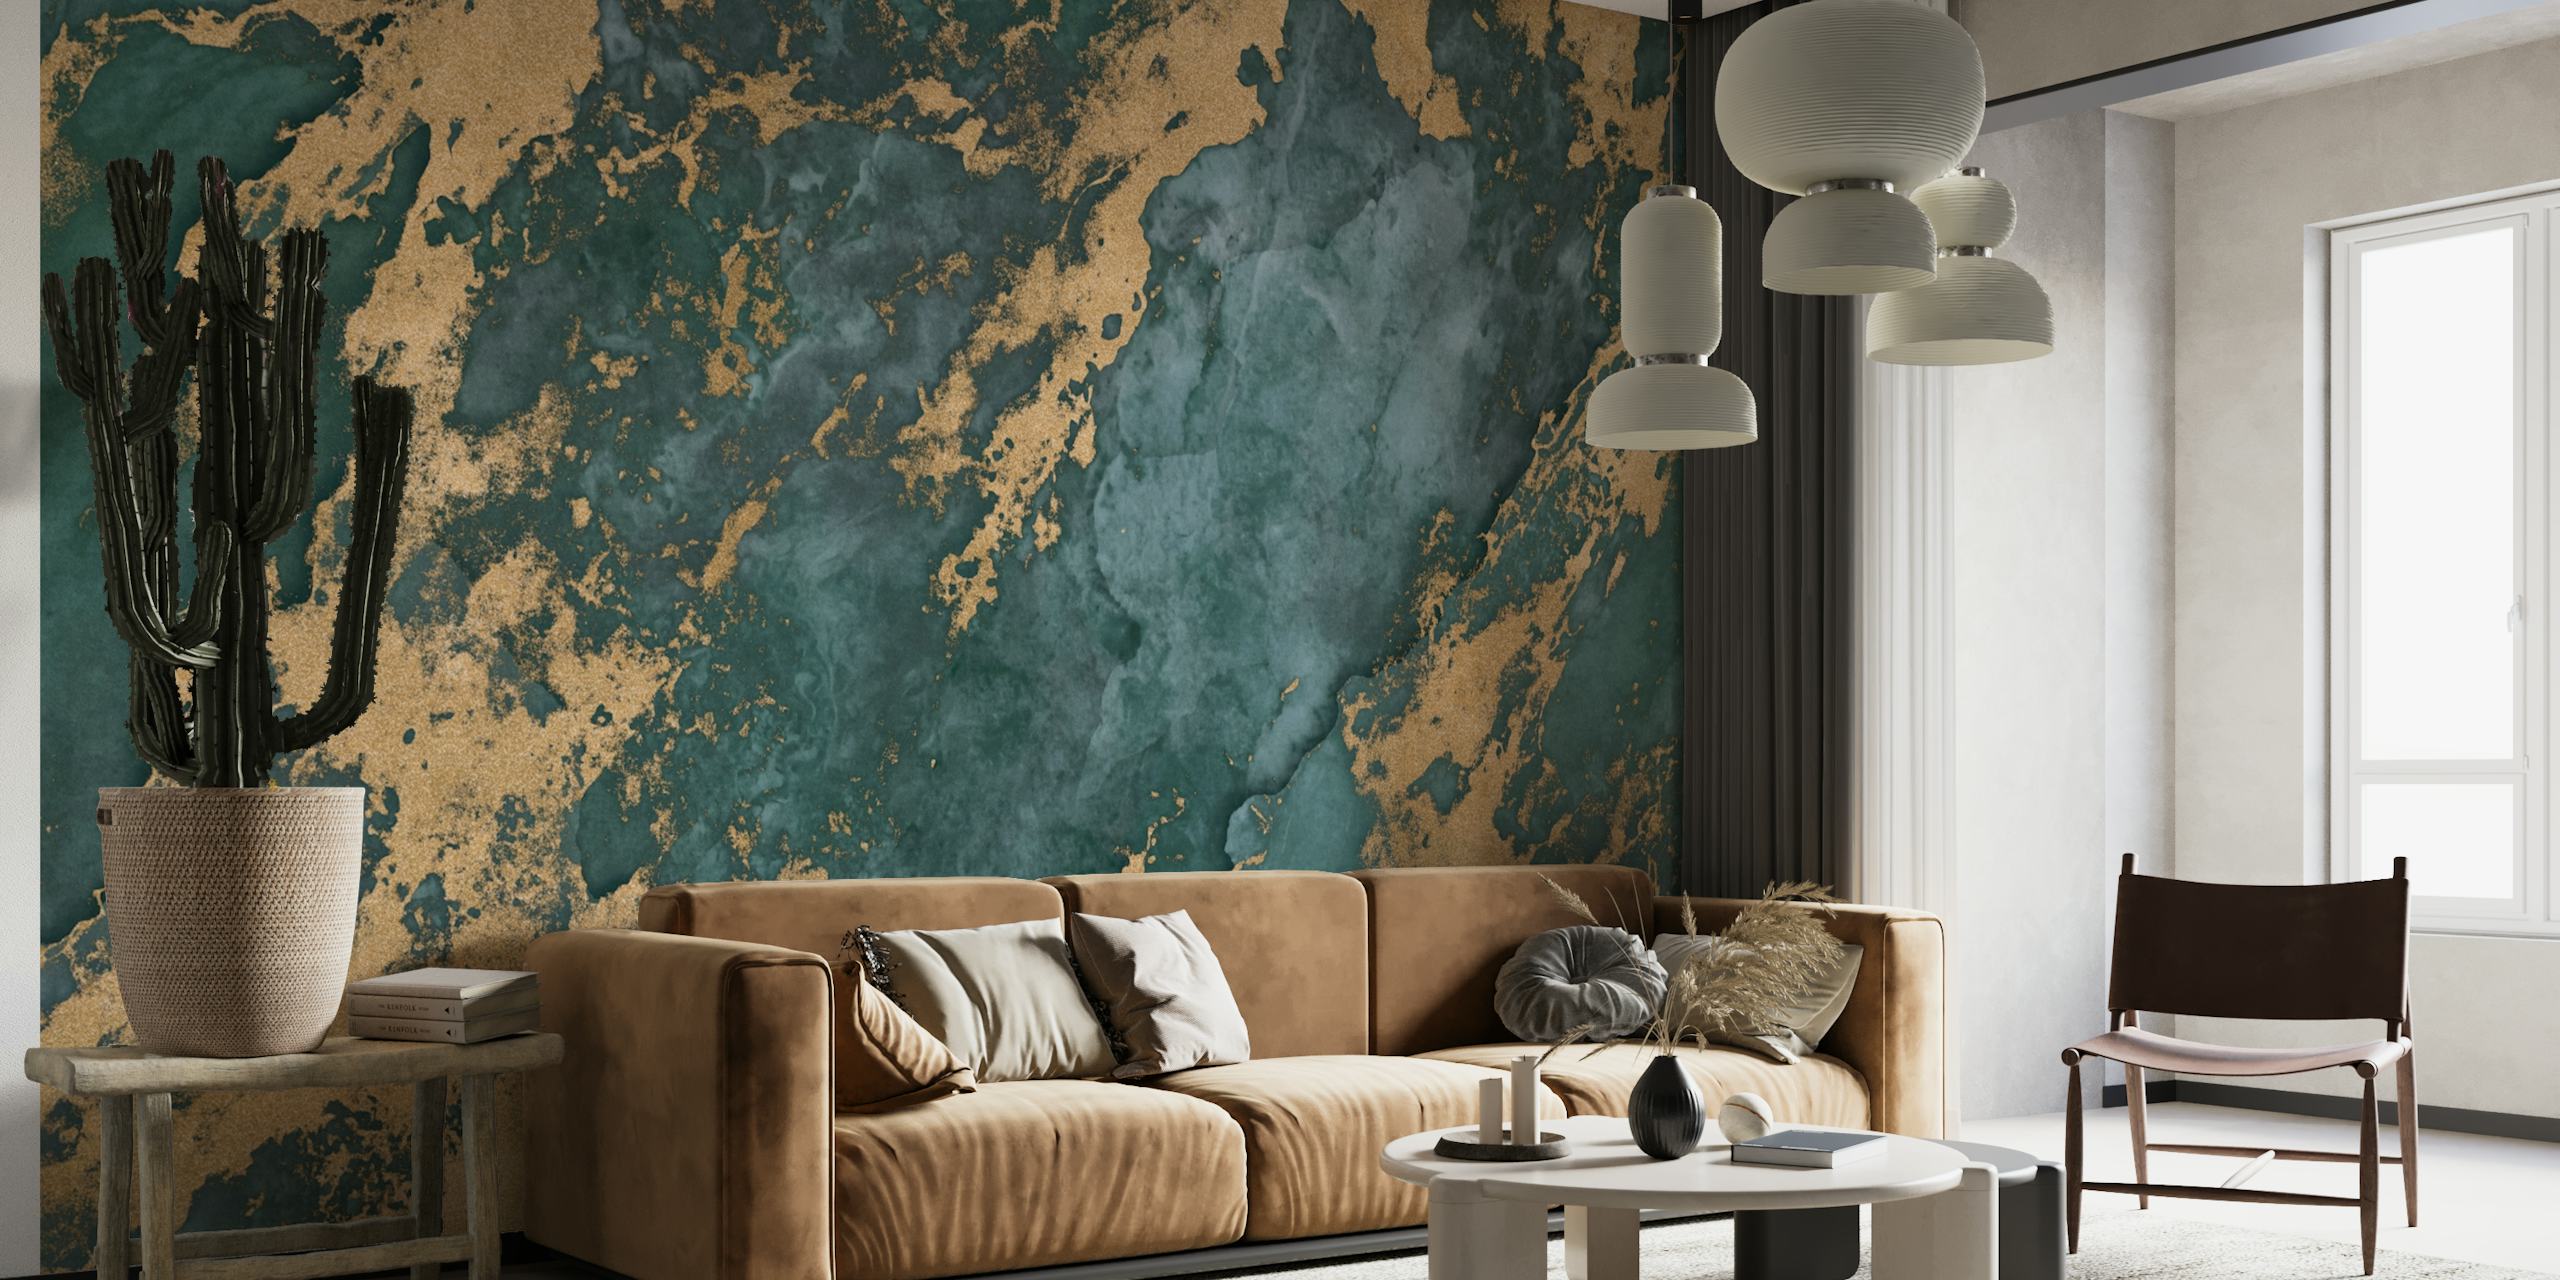 Mineral Marble Texture Teal Gold behang